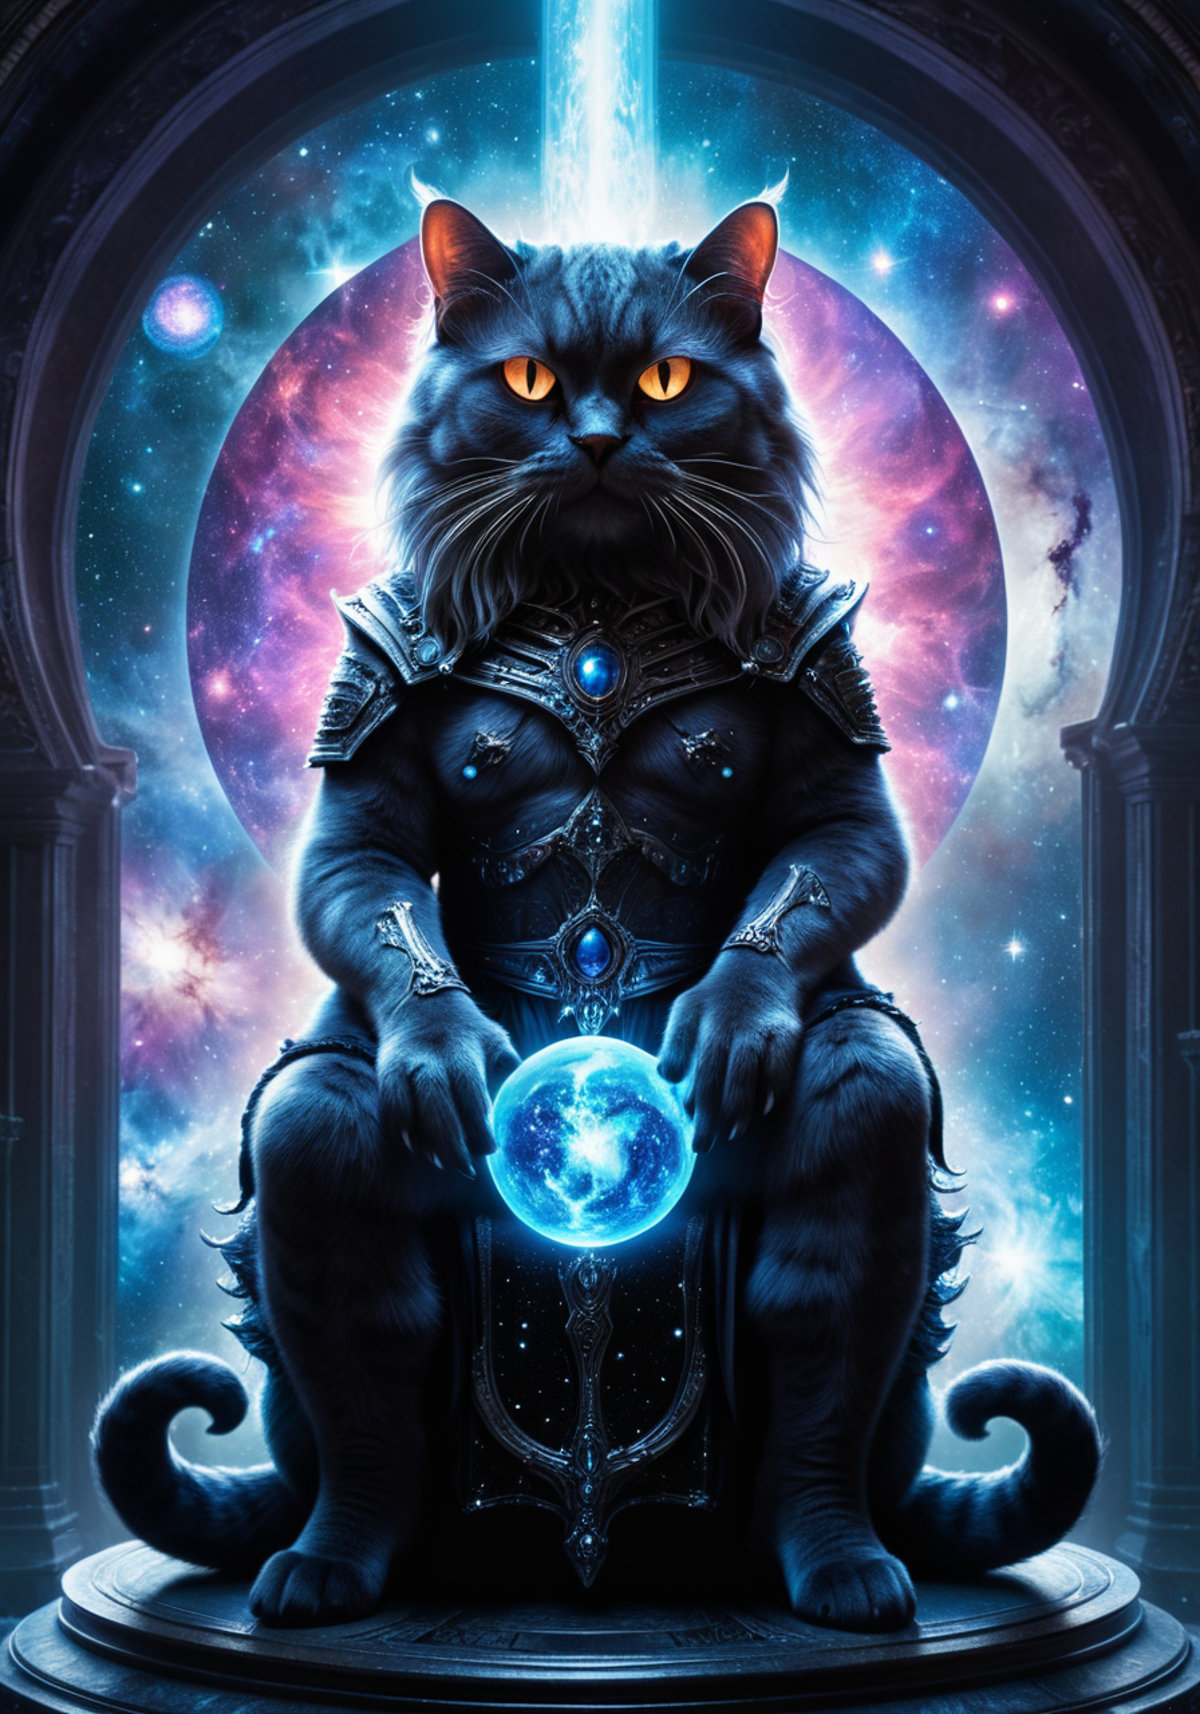 A cat in a crown and a blue globe, sitting in a chair in front of a starry background.